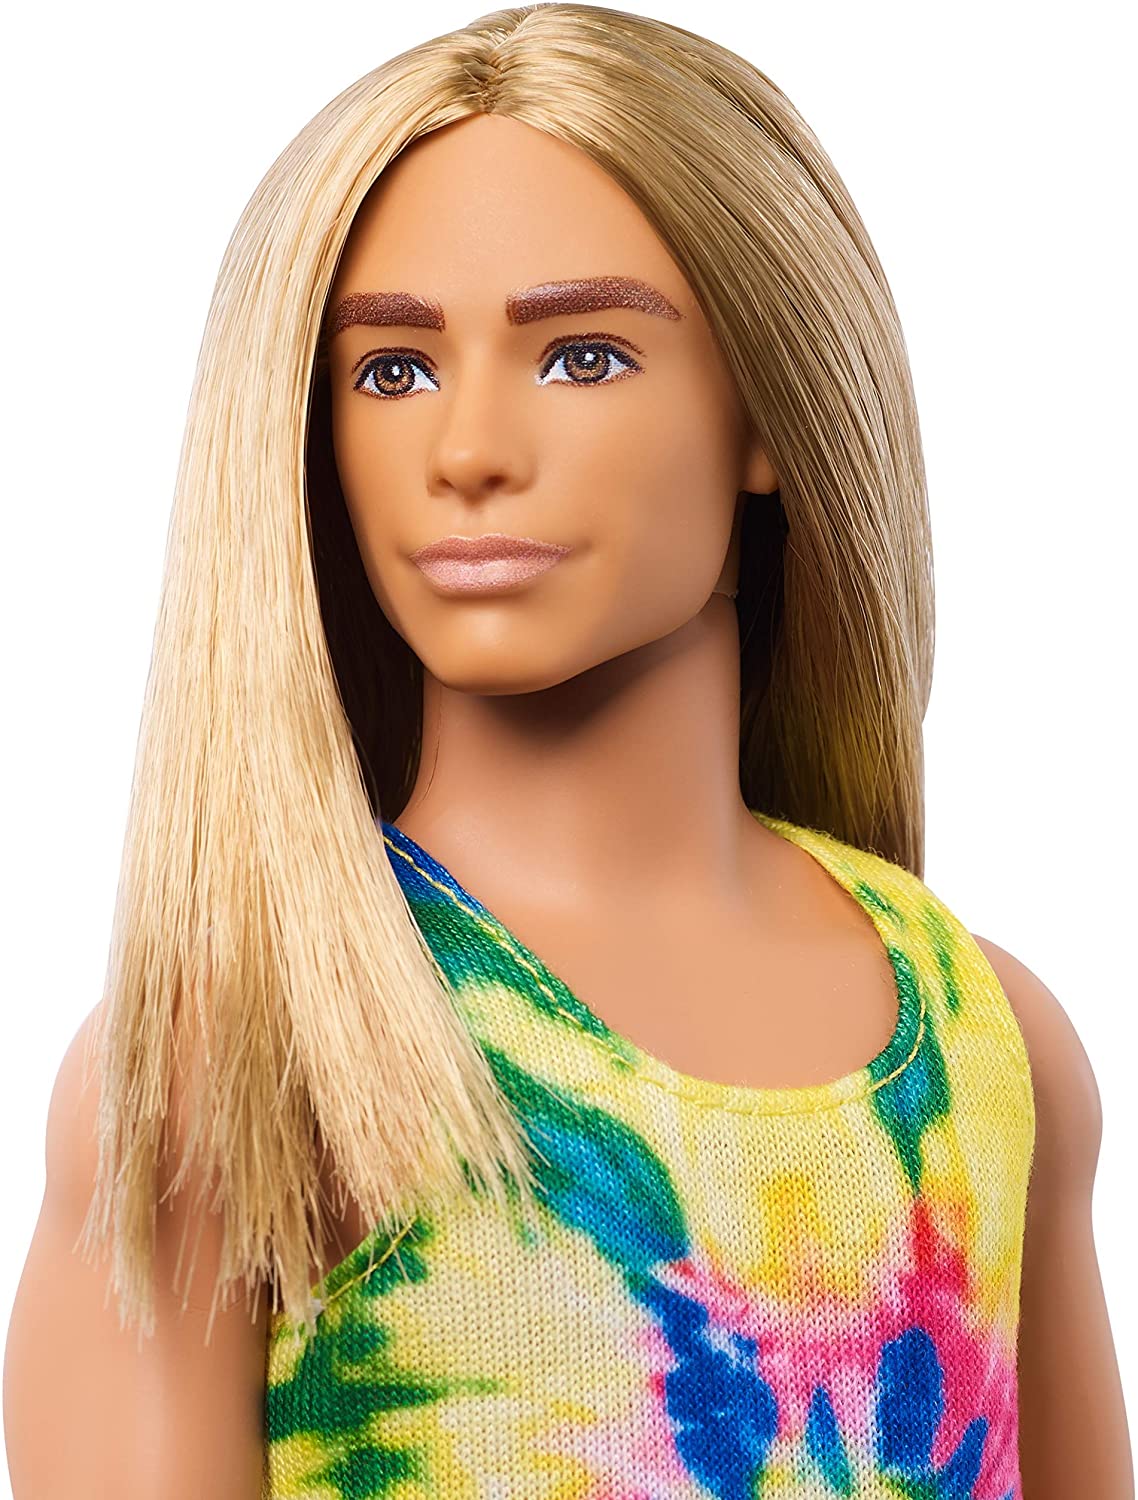 Ken Fashionistas Doll with | 3D Play Carpets